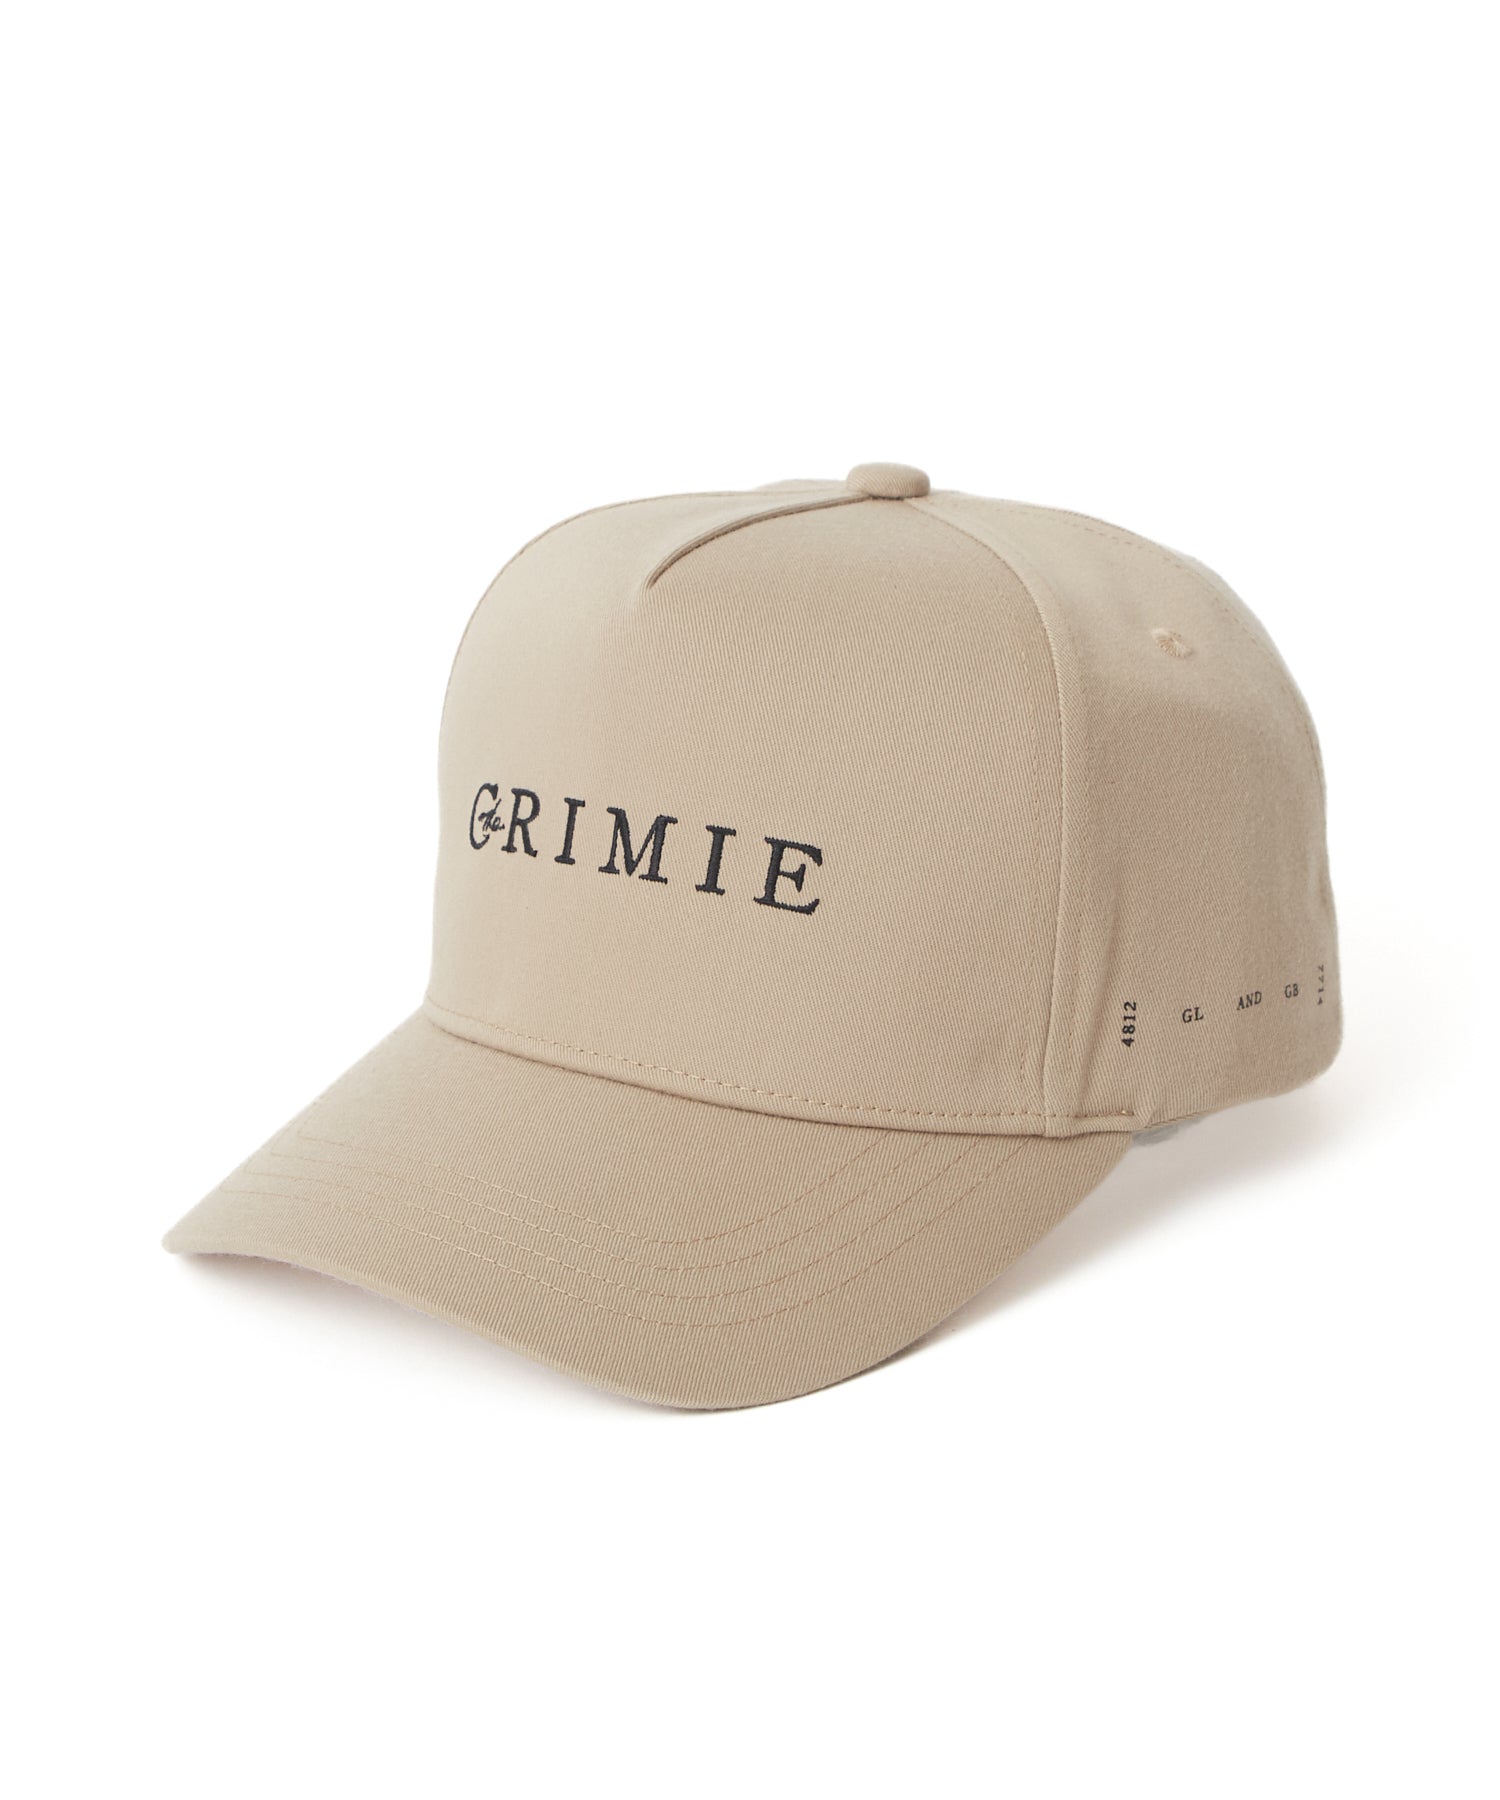 THE CRIMIE EMBROIDERY CAP